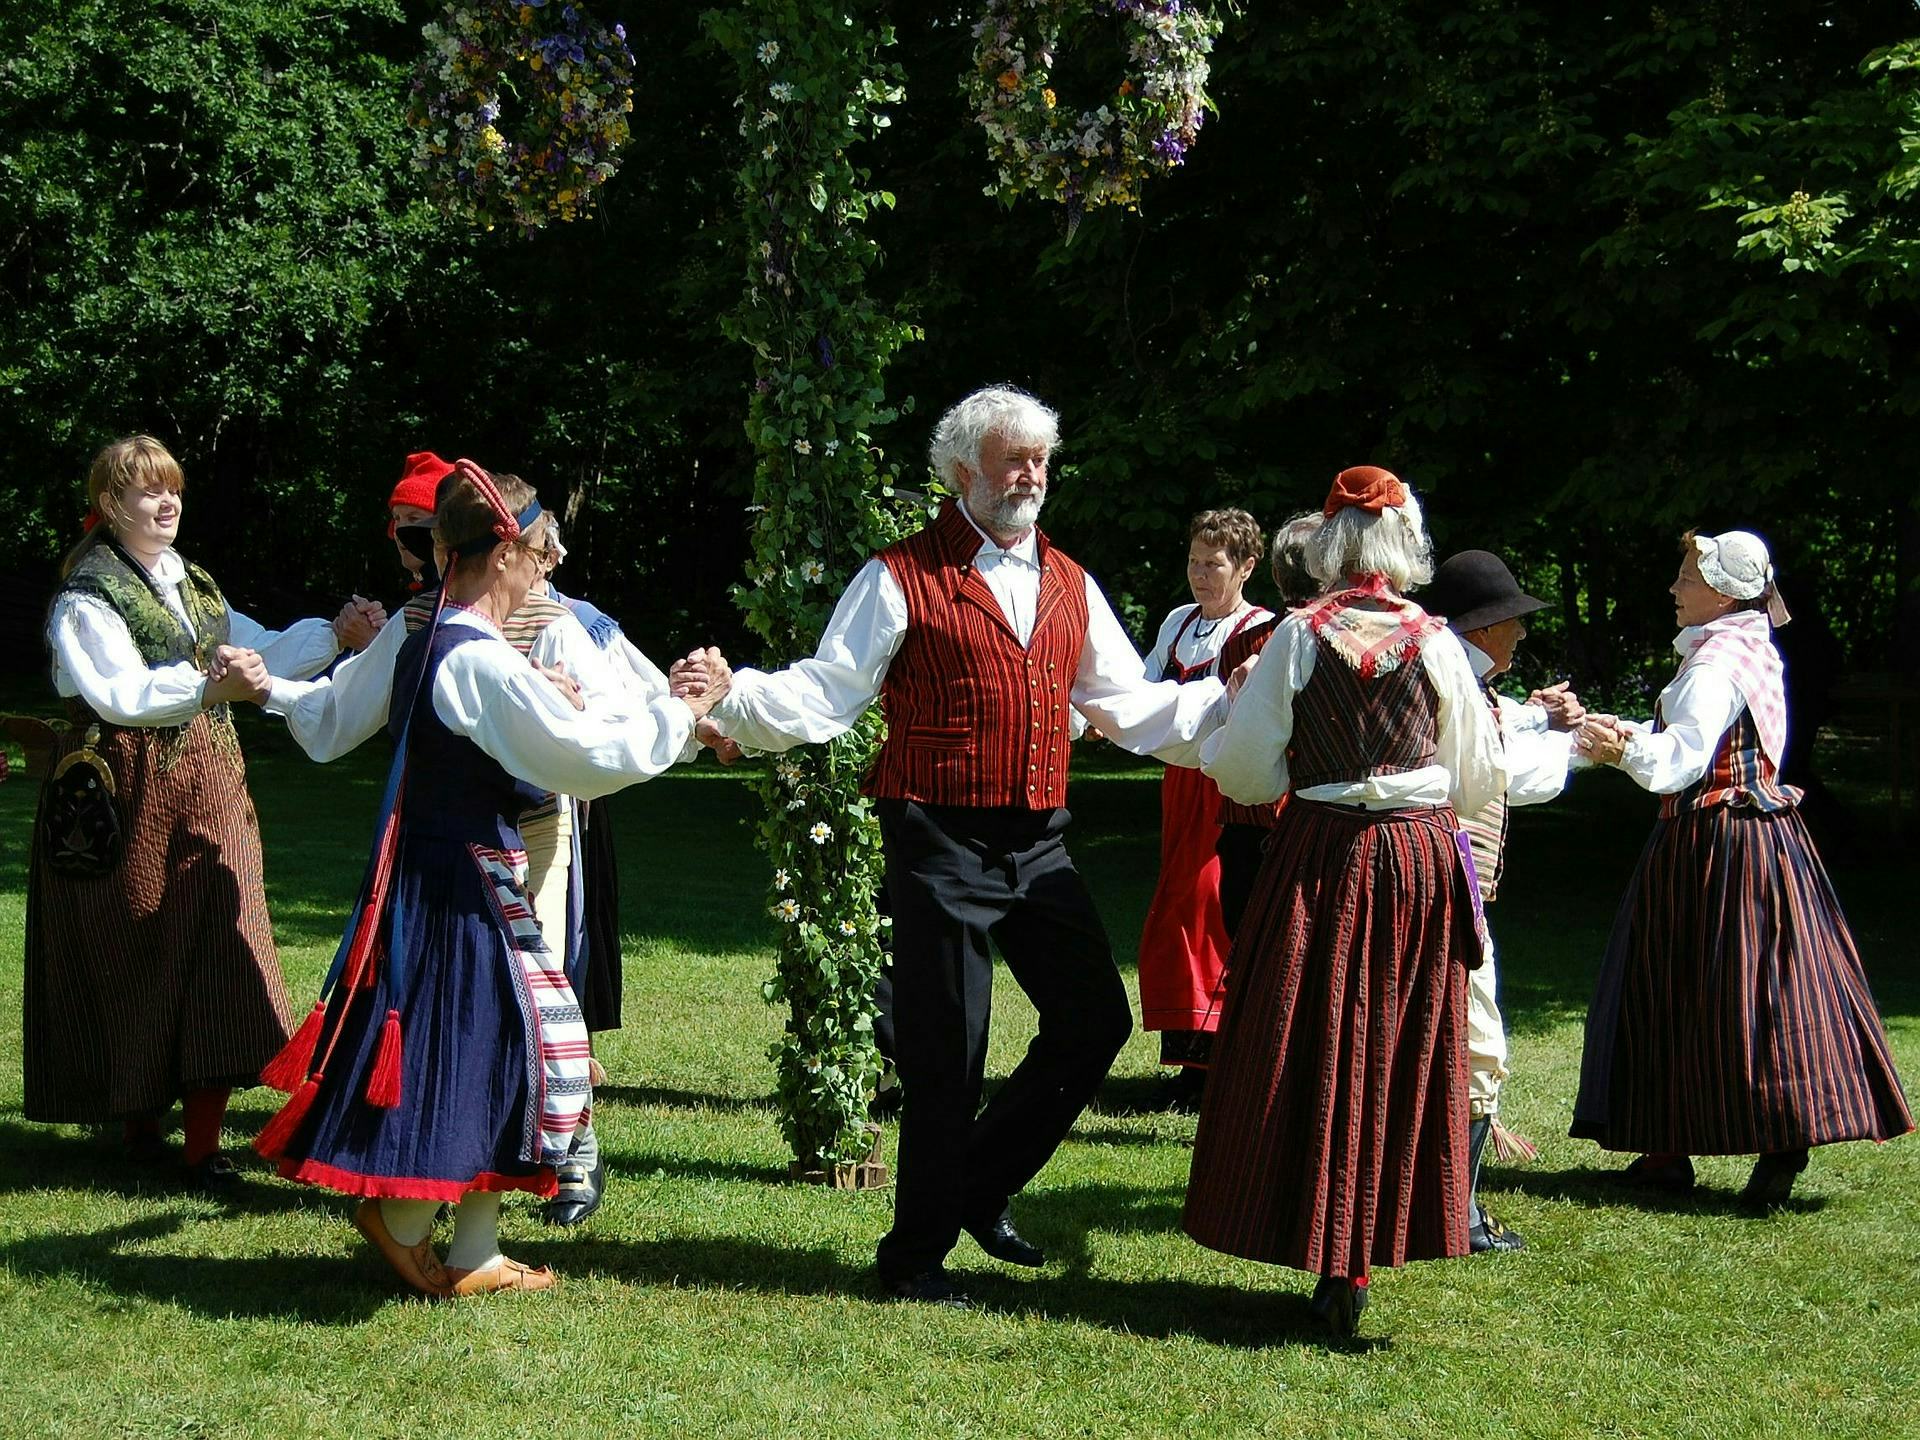 Swedes in traditional dress dancing around the maypole celebrating Midsummer